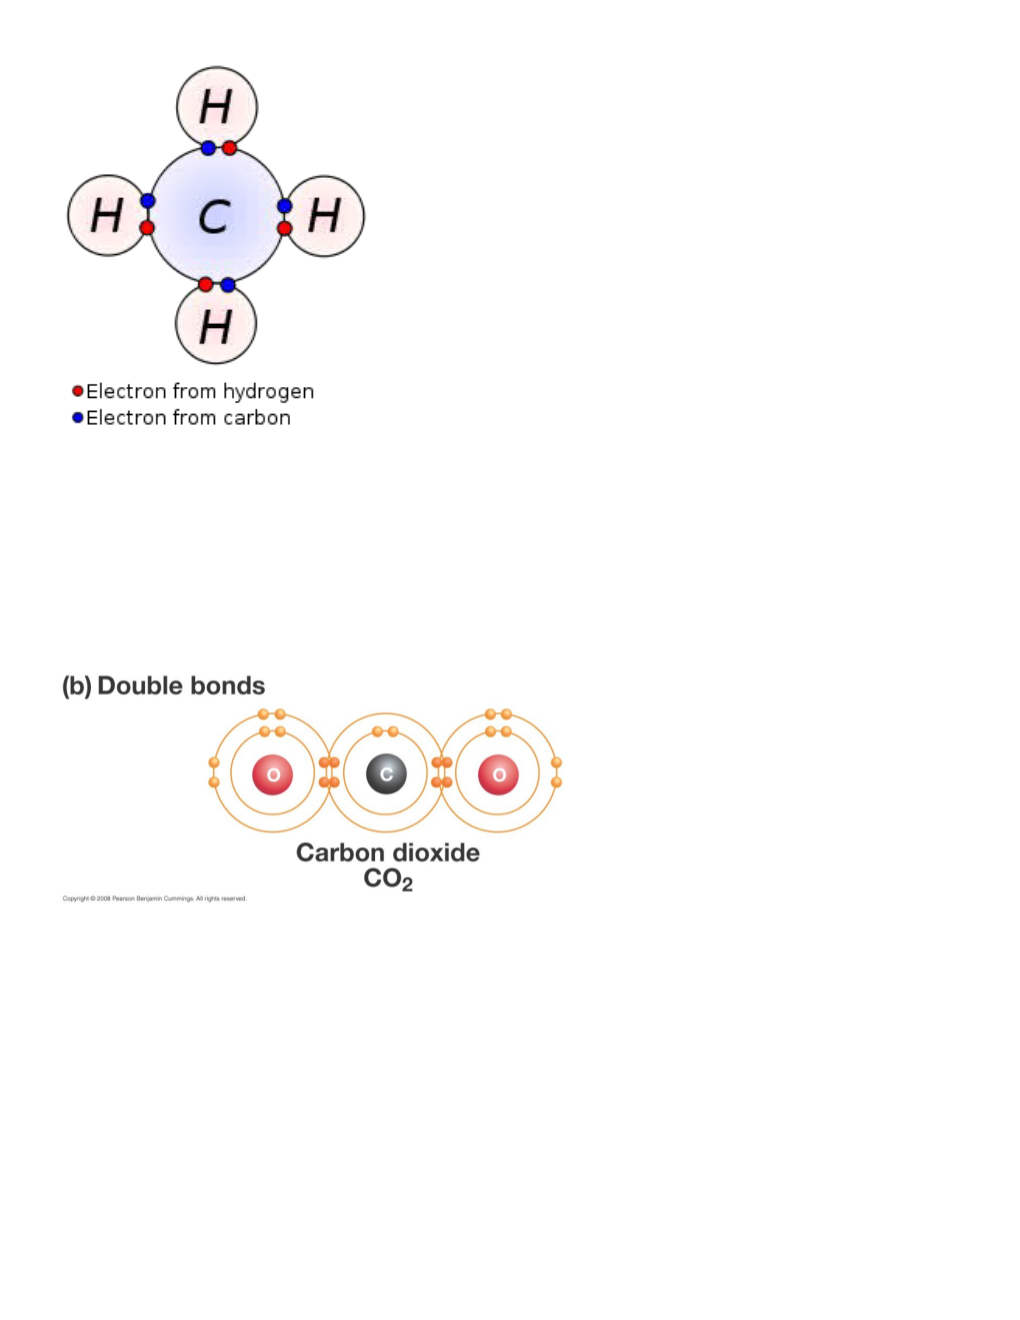 How Are Atoms Held Together in a Covalent Bond?